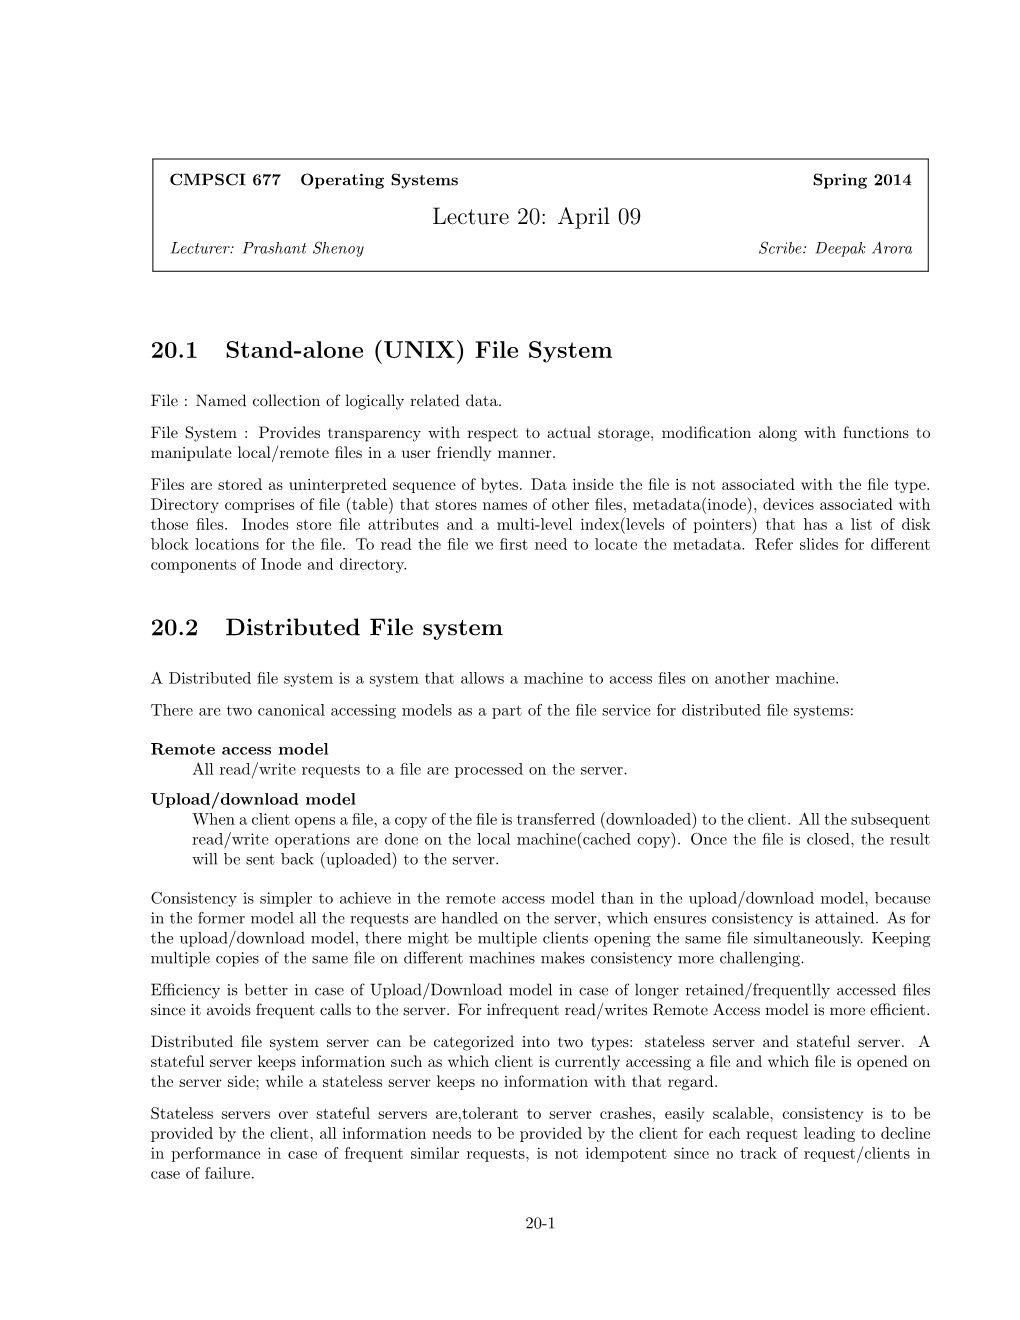 (UNIX) File System 20.2 Distributed File System